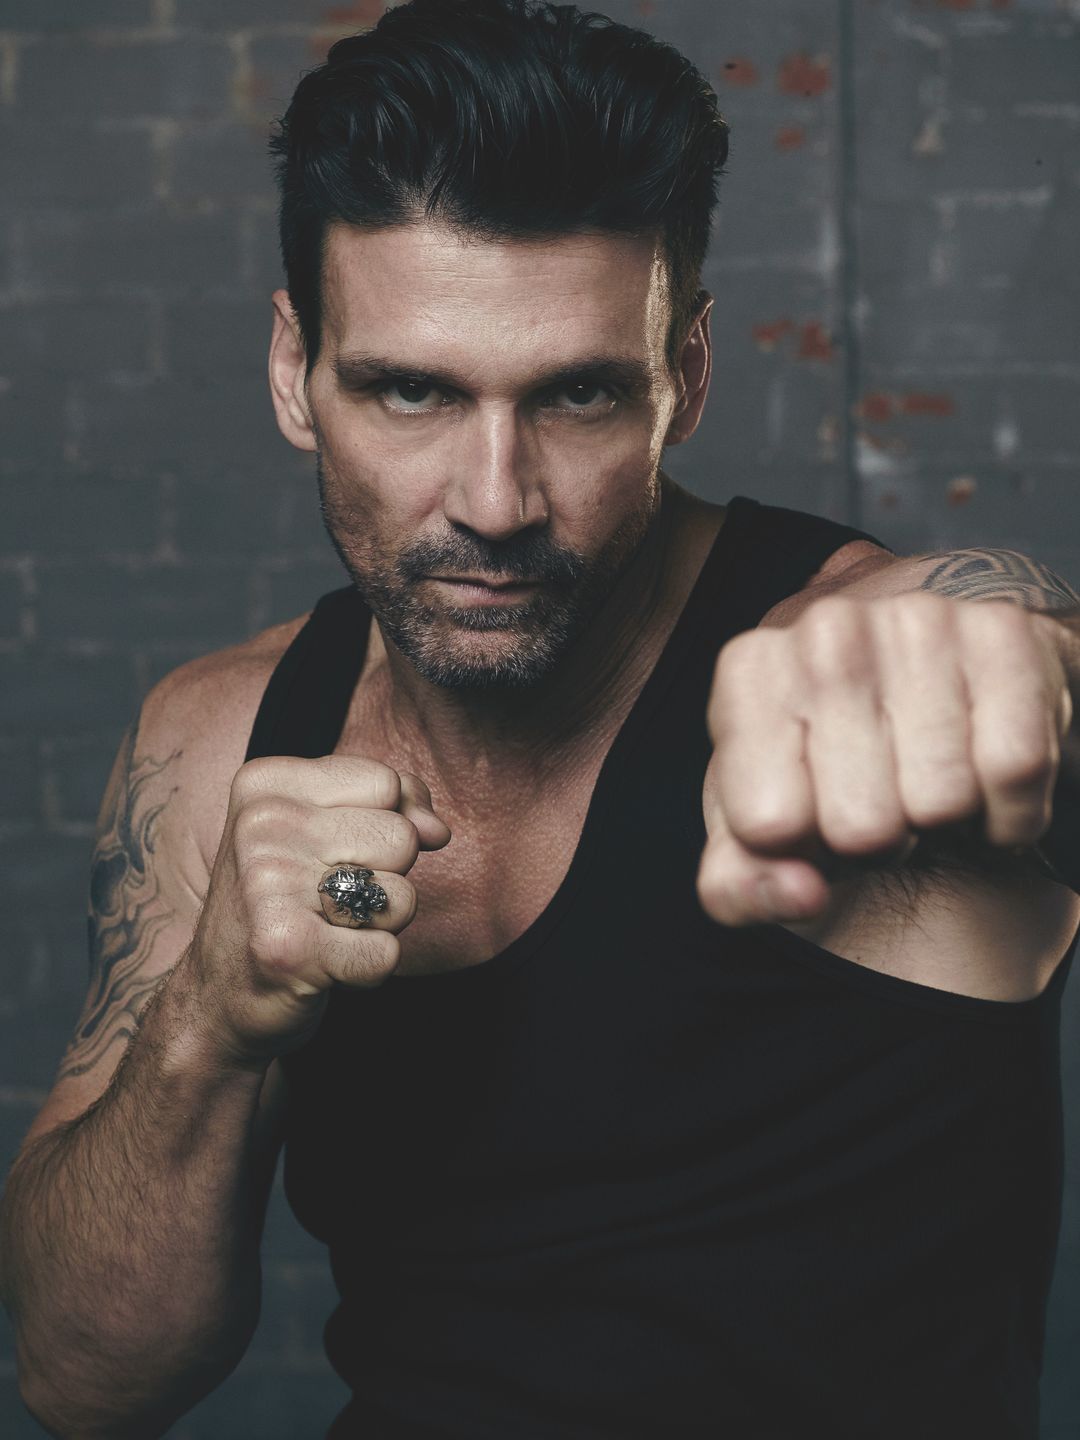 Frank Grillo in his teens